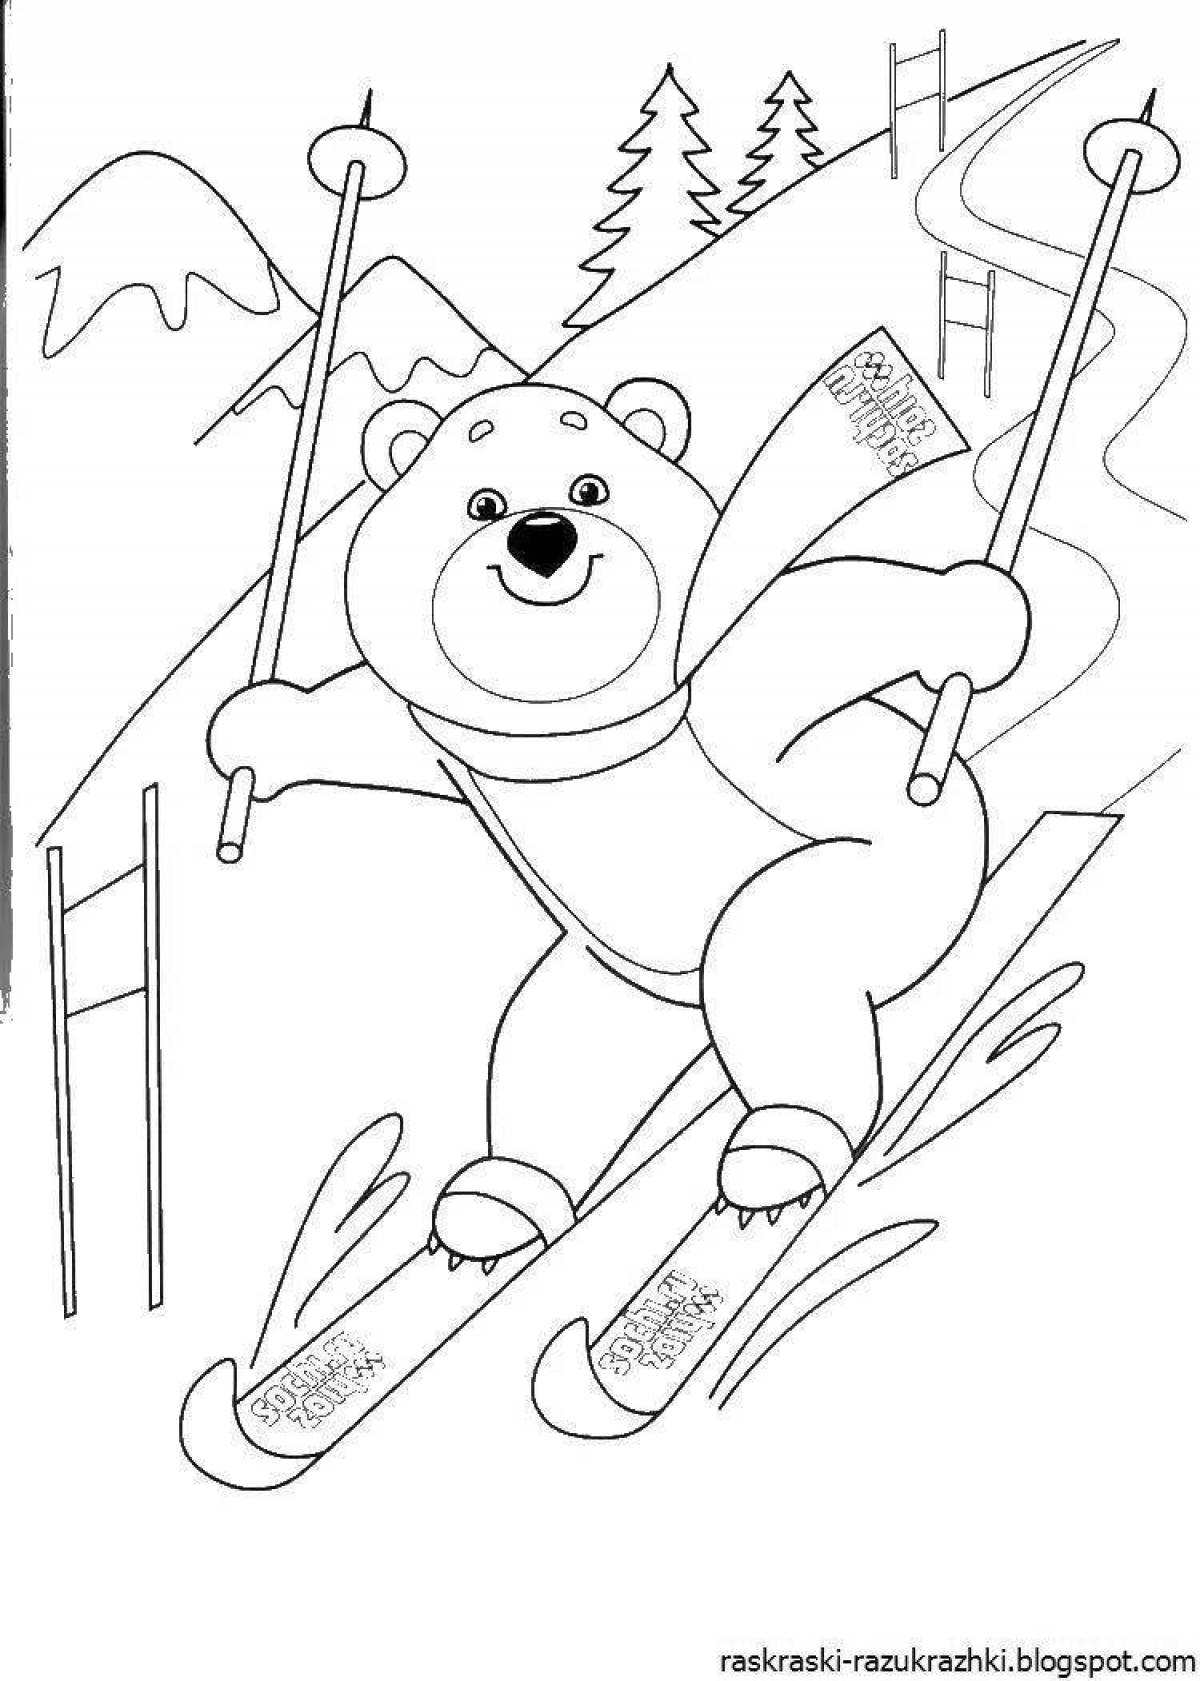 Radiant winter sports coloring book for kids